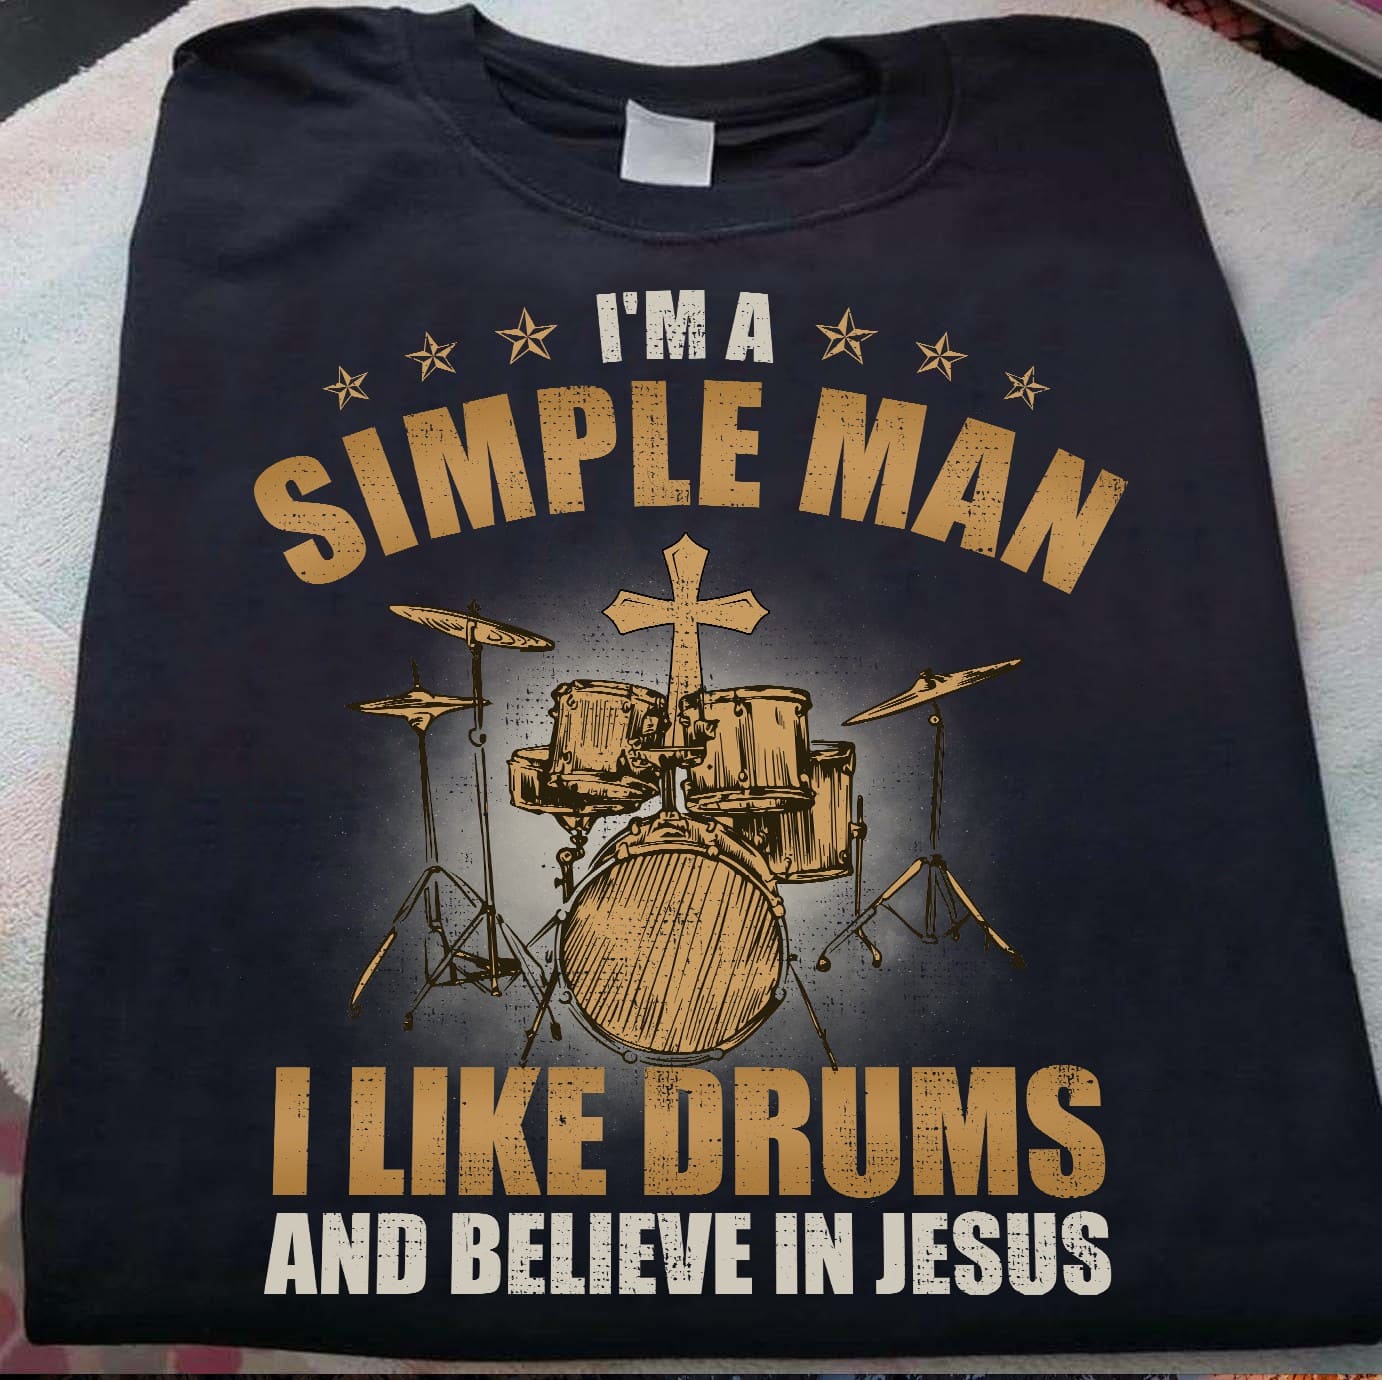 I'm a simple man I like drums and believe in Jesus - T-shirt for drummers